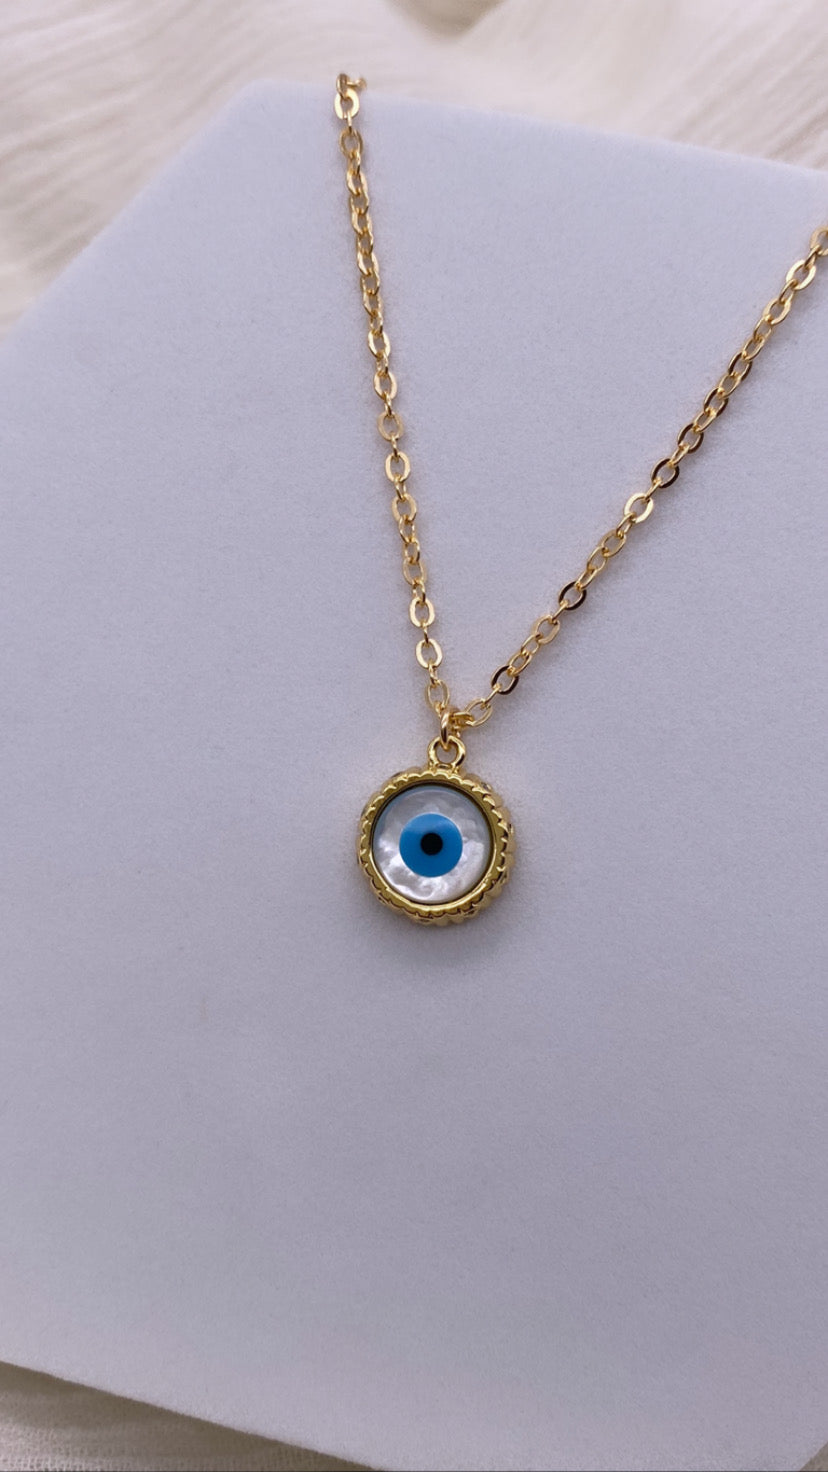 Evil Eye Mother of Pearl Pendant Necklace - Gold Filled